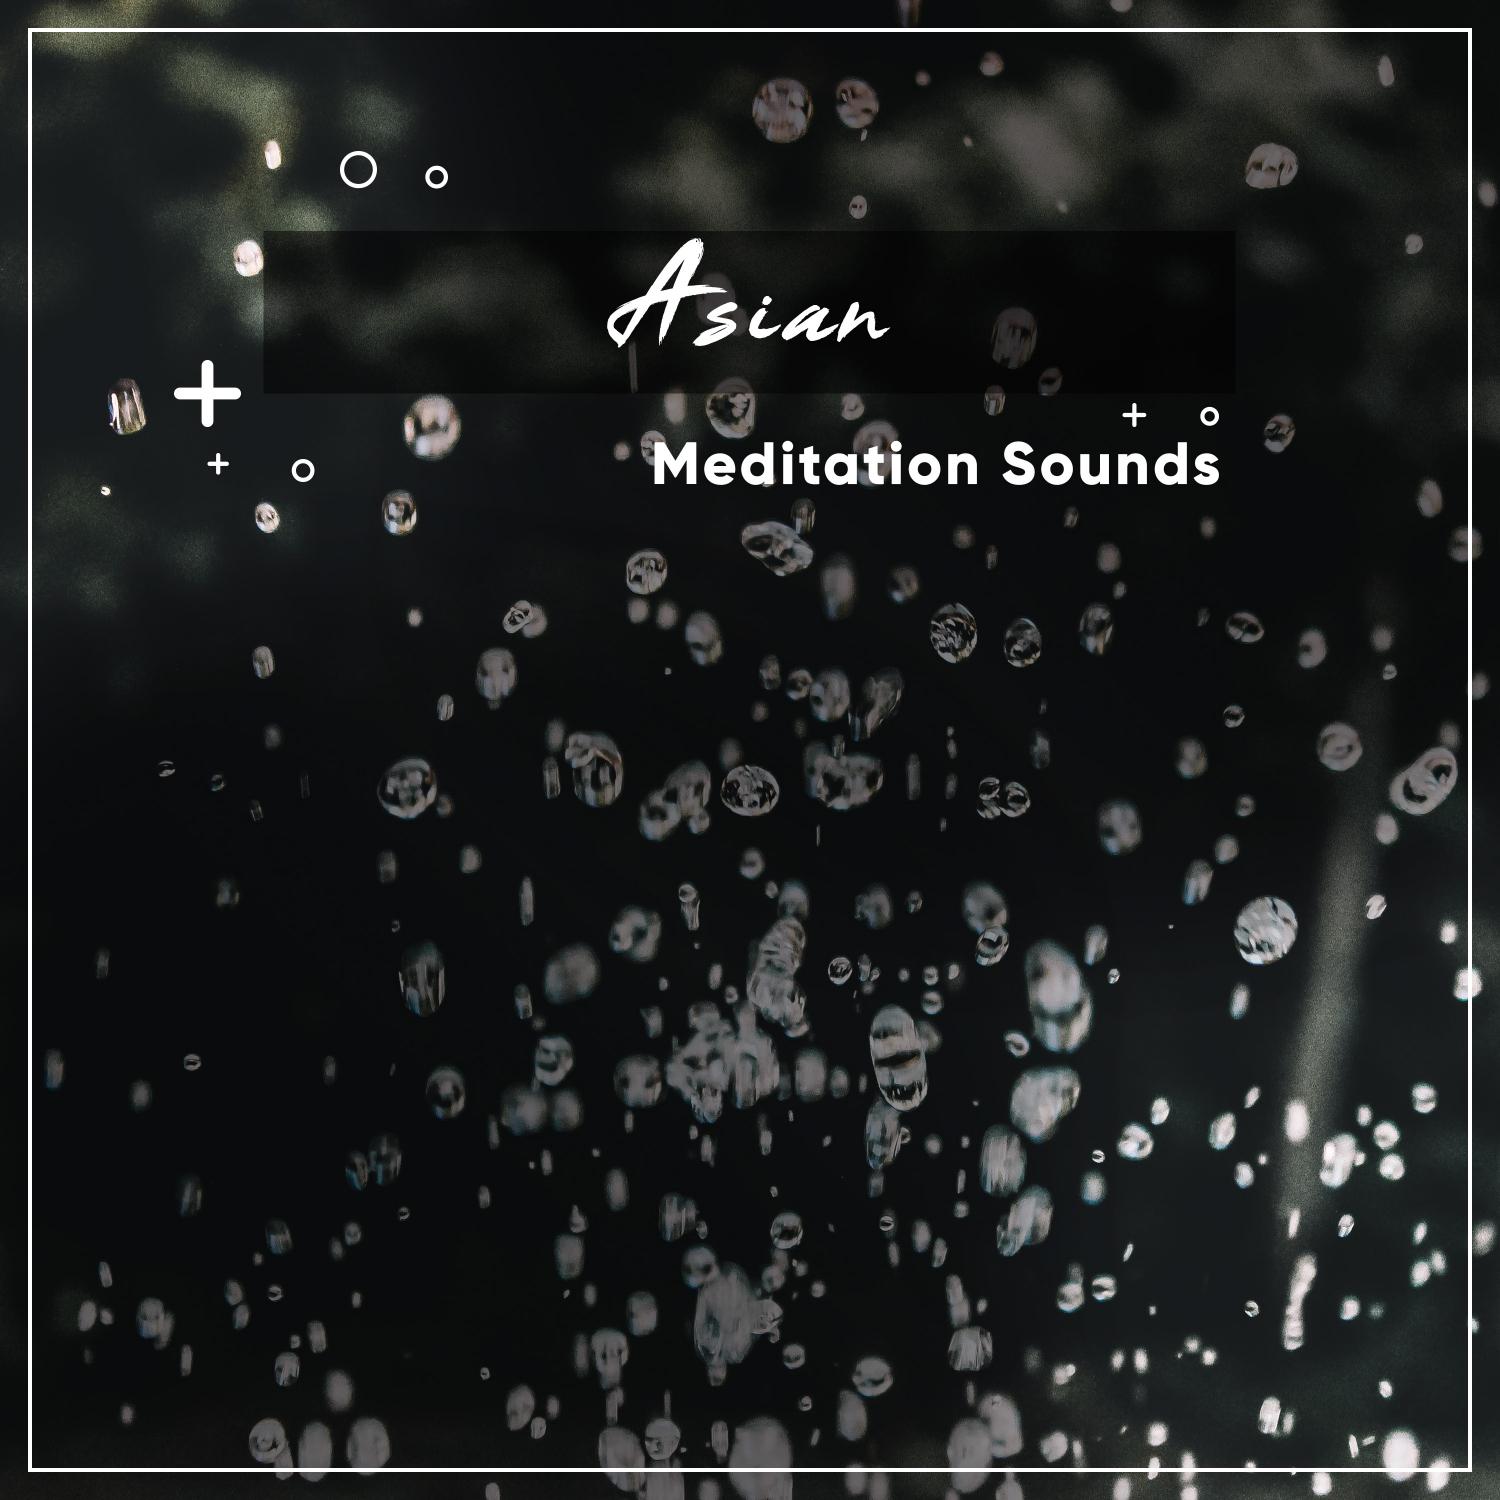 20 Asian Meditation Sounds to Aid Calm and Relaxation